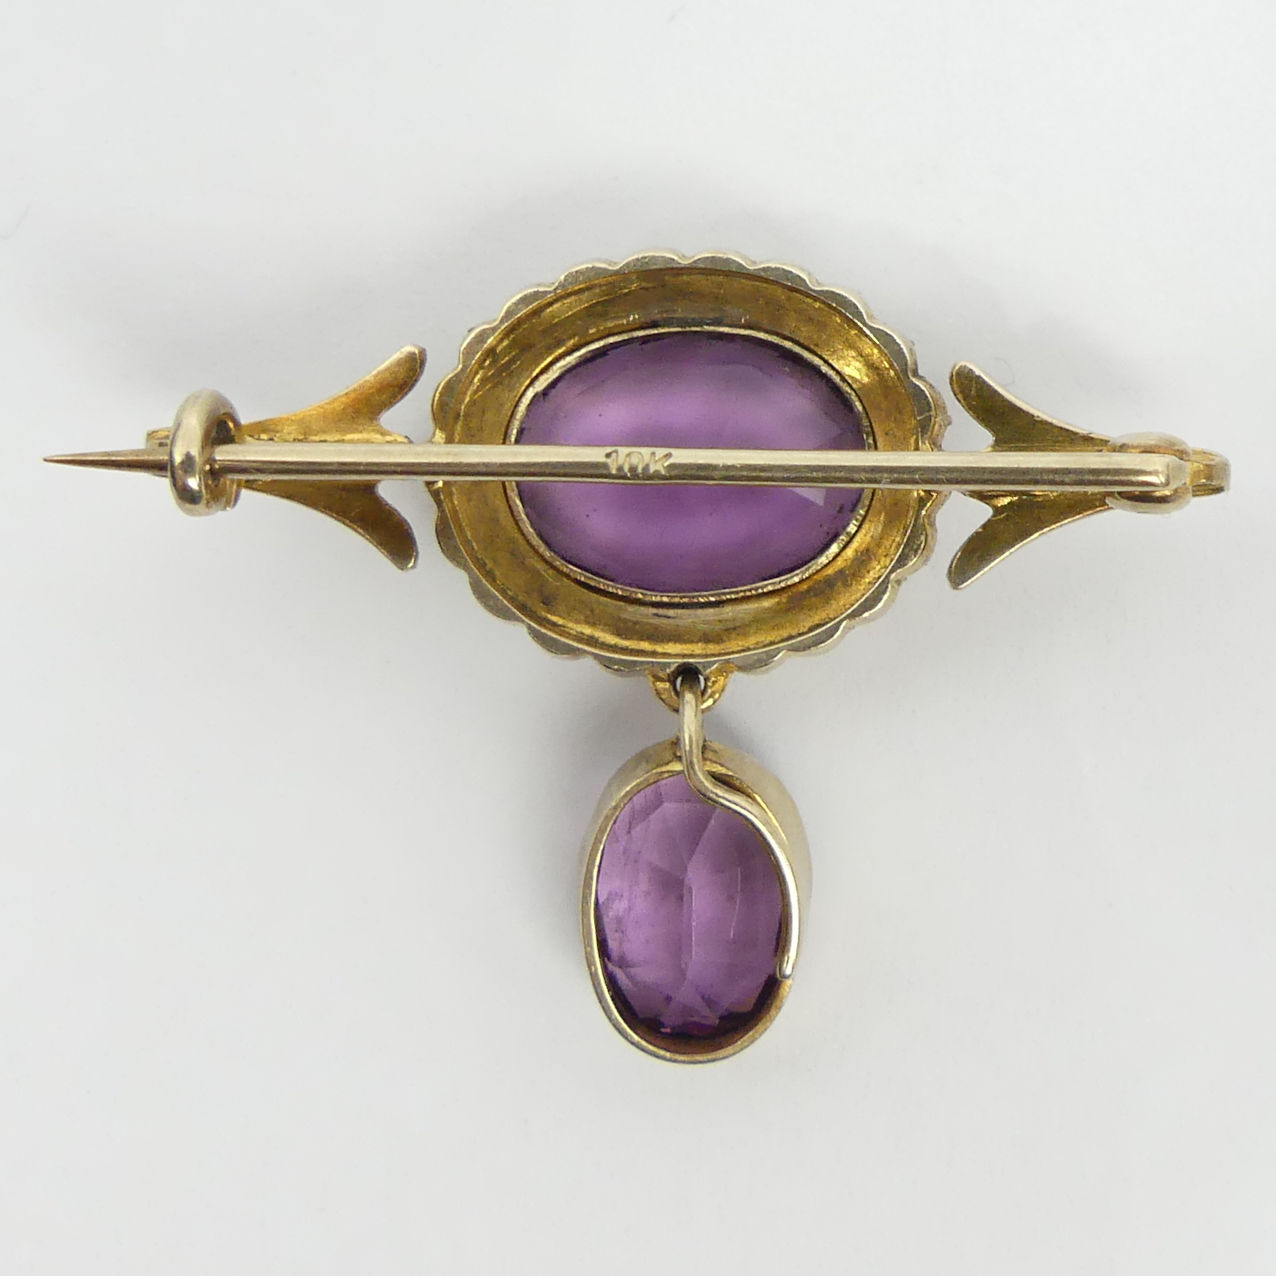 10ct gold amethyst and seed pearl brooch, 5.1 grams, 25mm x 26mm. UK Postage £12. - Image 2 of 2